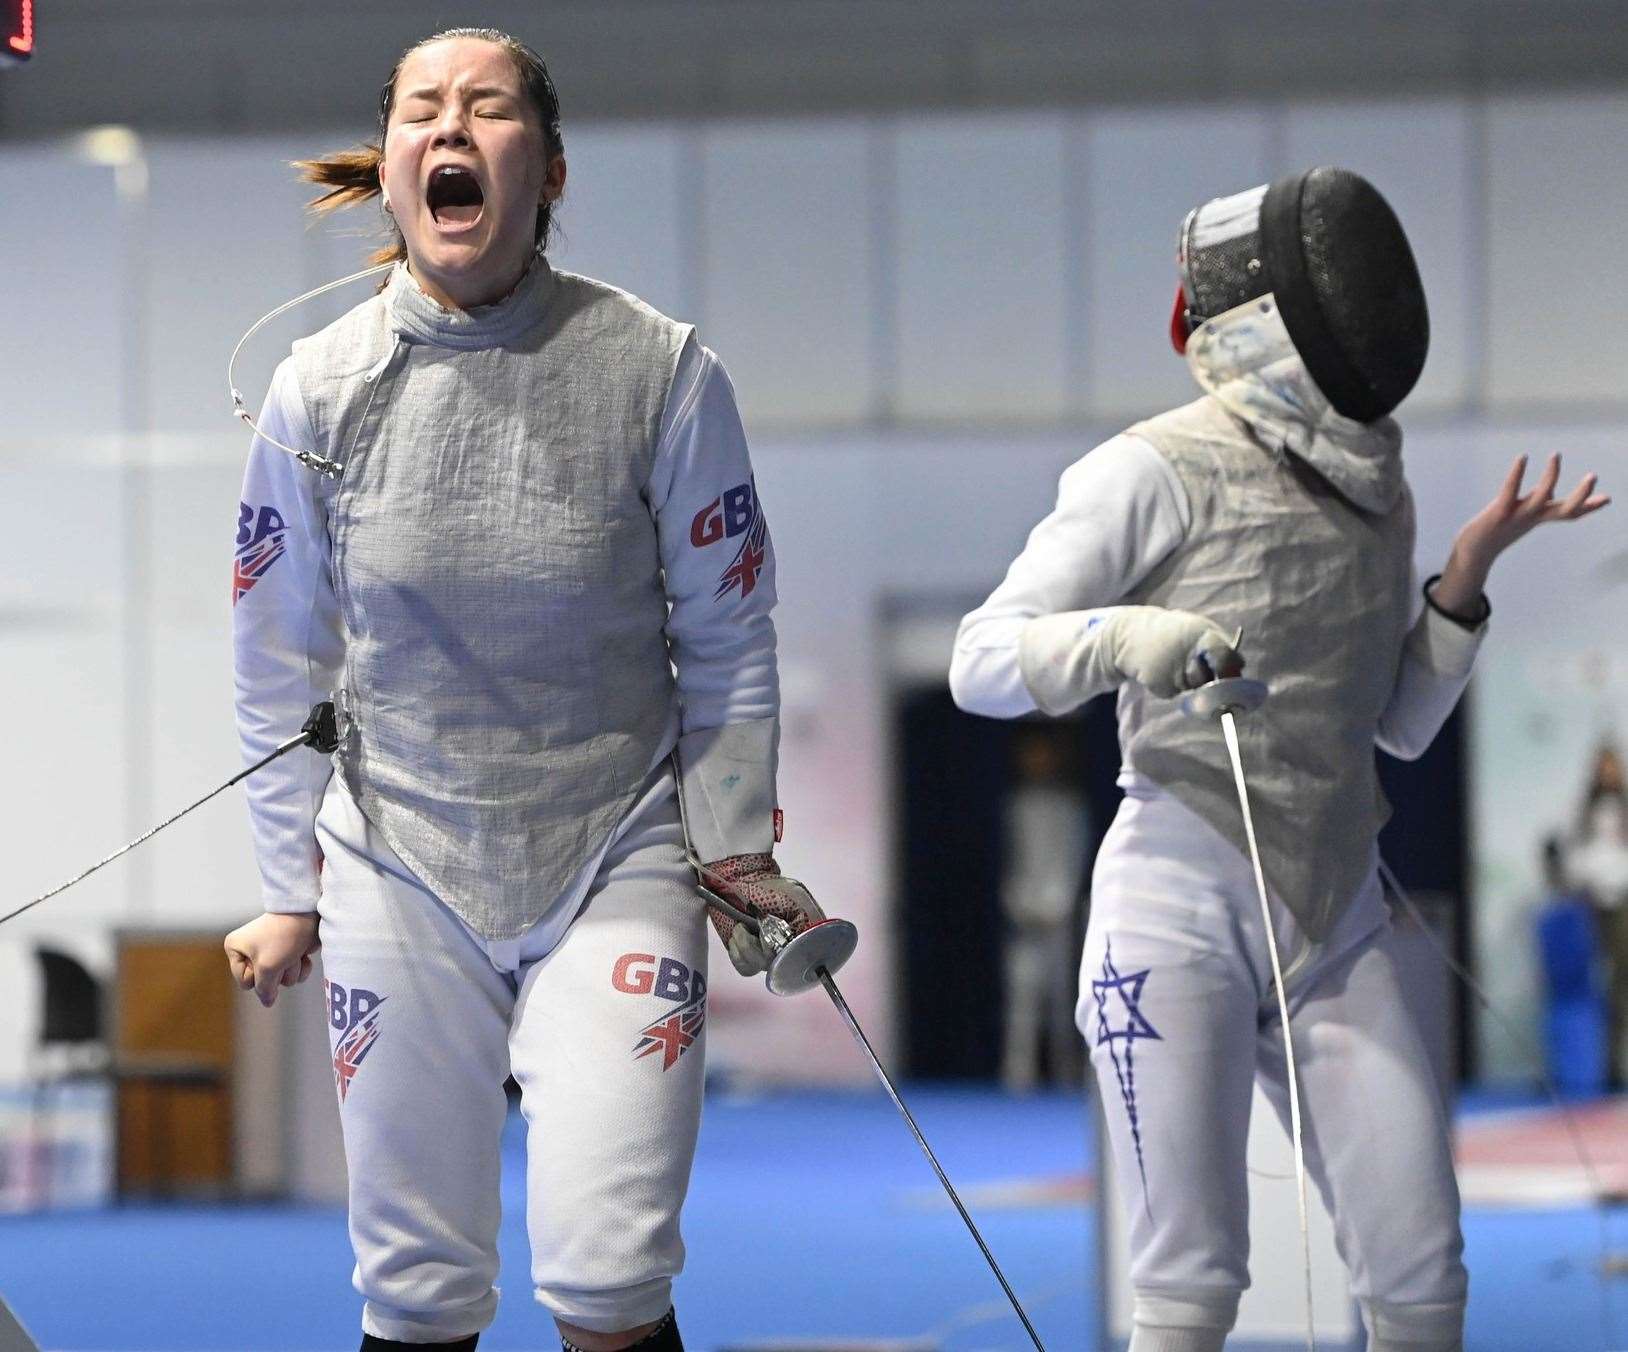 Bromley's Amelie Tsang could follow the likes of Olympic champions Tom Daley and Alex Yee and Paralympic gold medallist Hollie Arnold in winning SportsAid's prestigious One-to-Watch Award. Picture: British Fencing